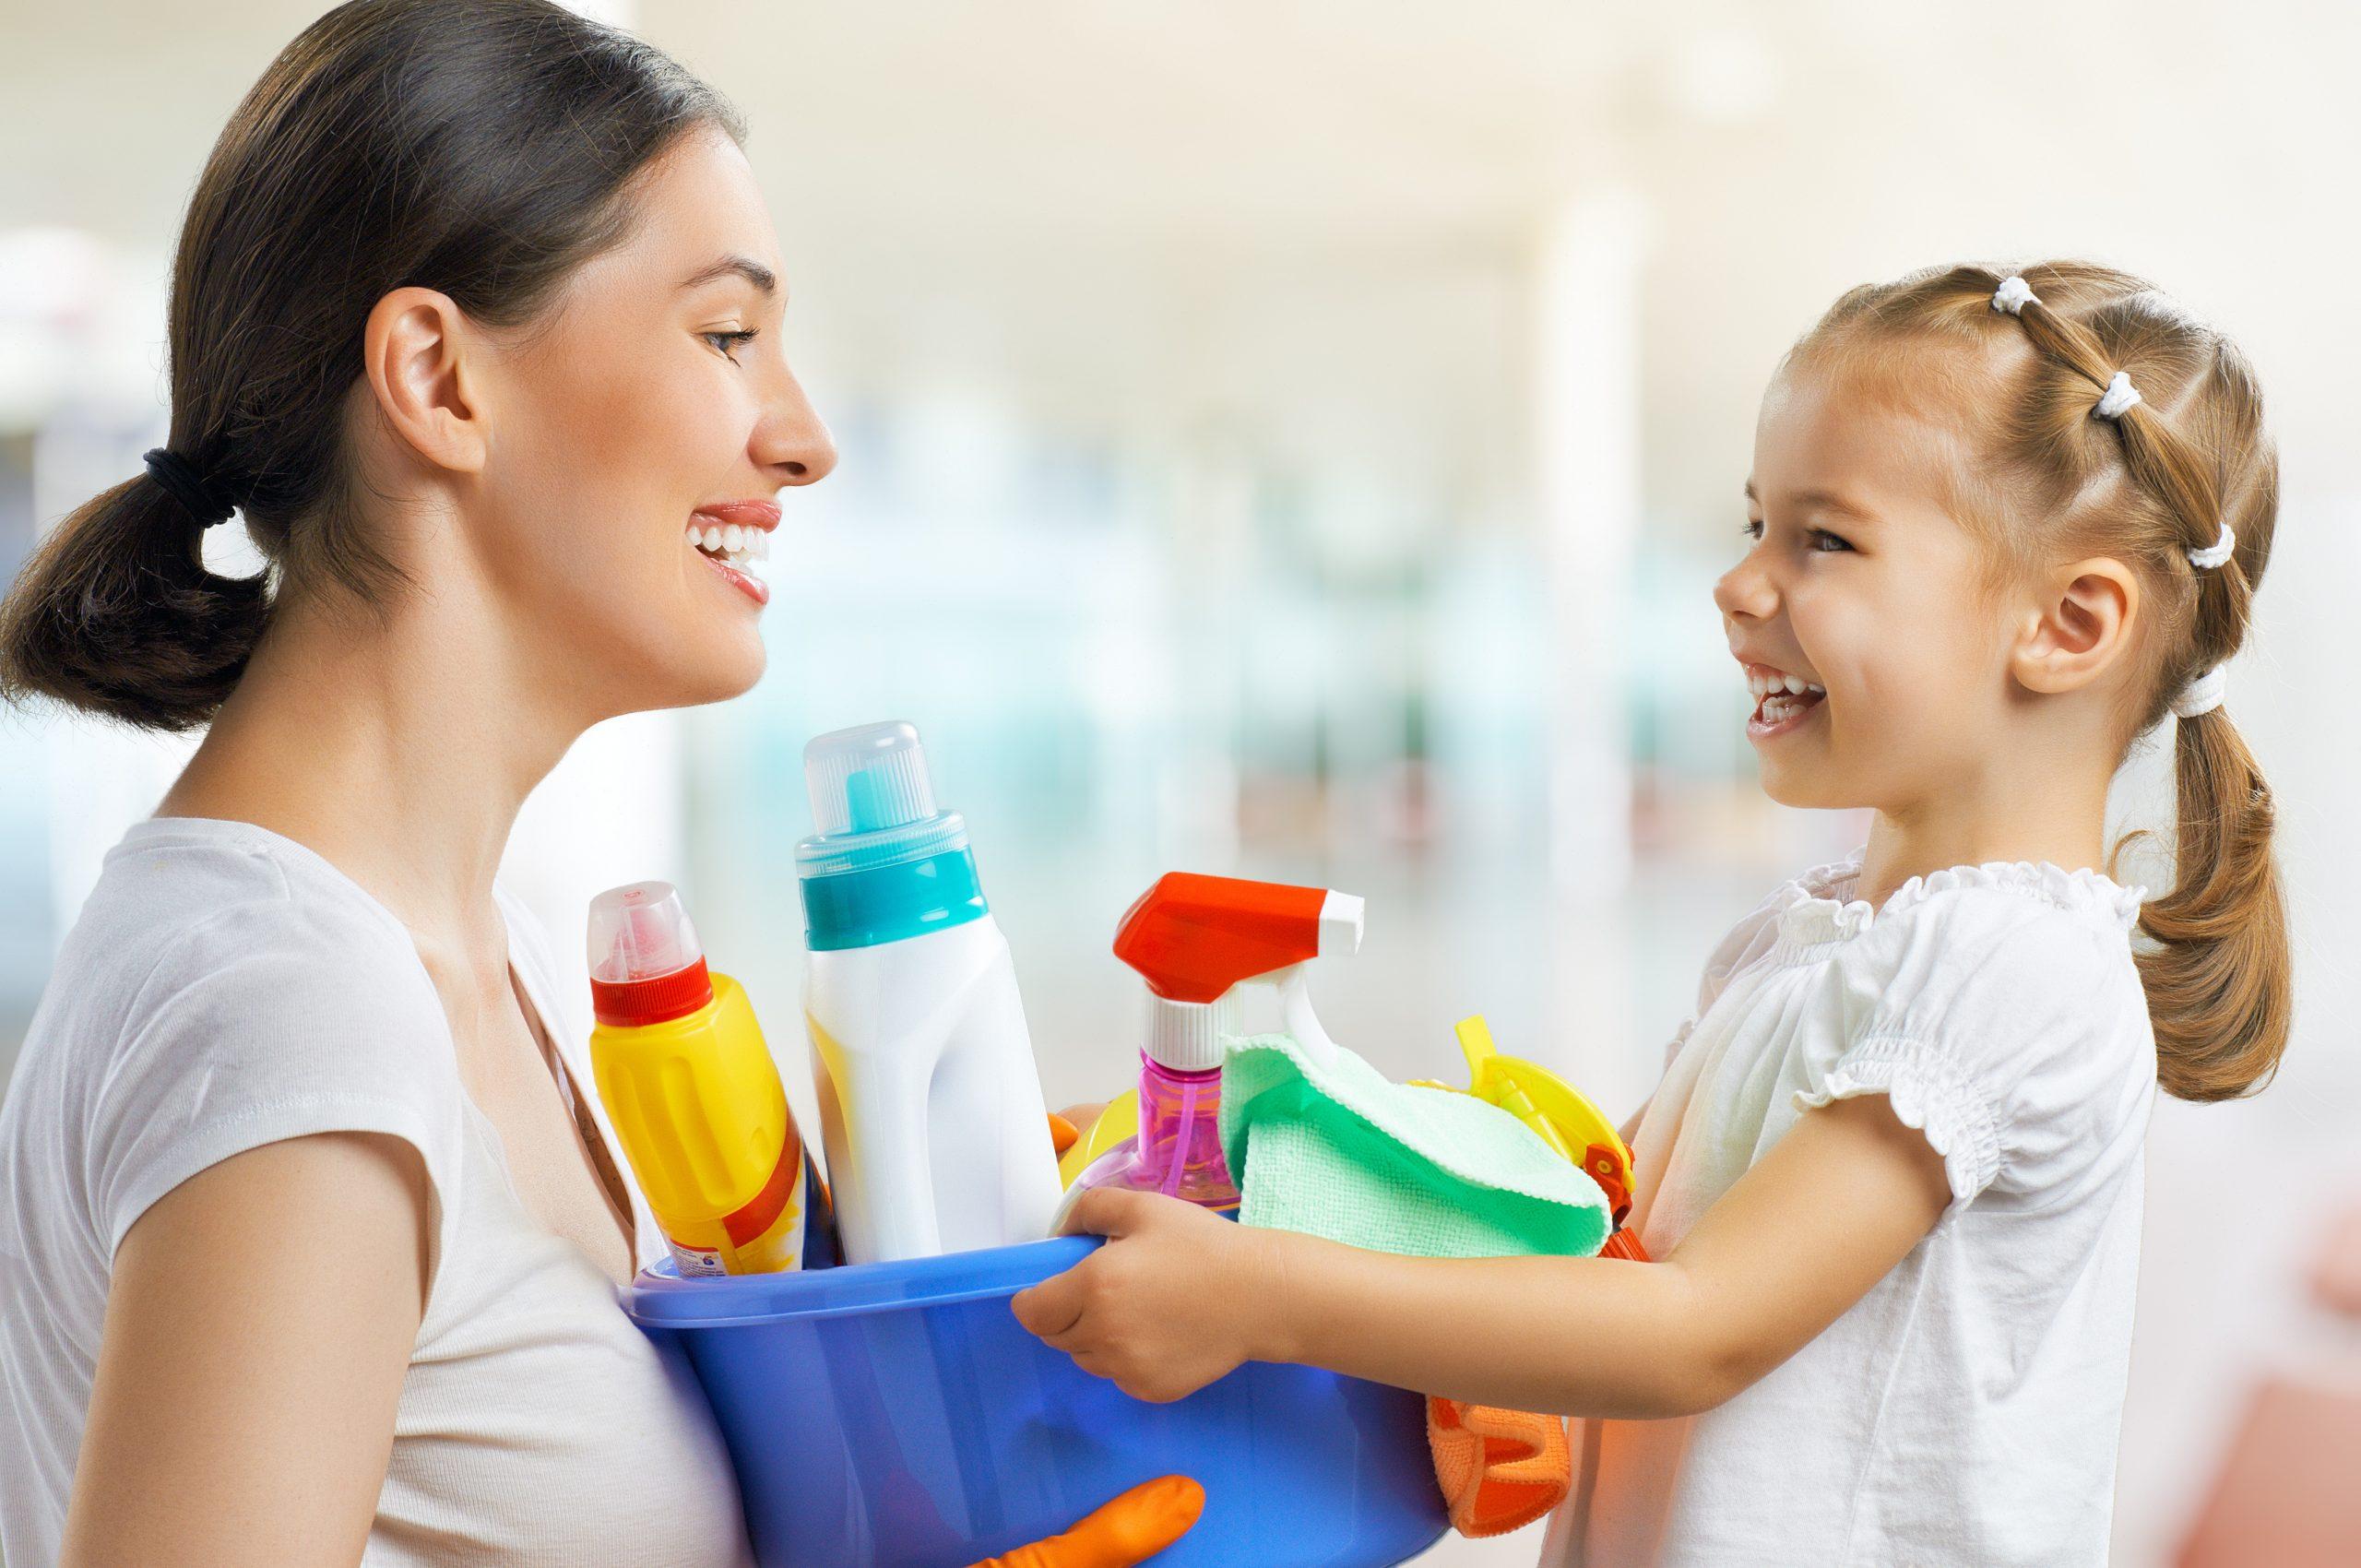 mom and small girl doing chores together and smiling